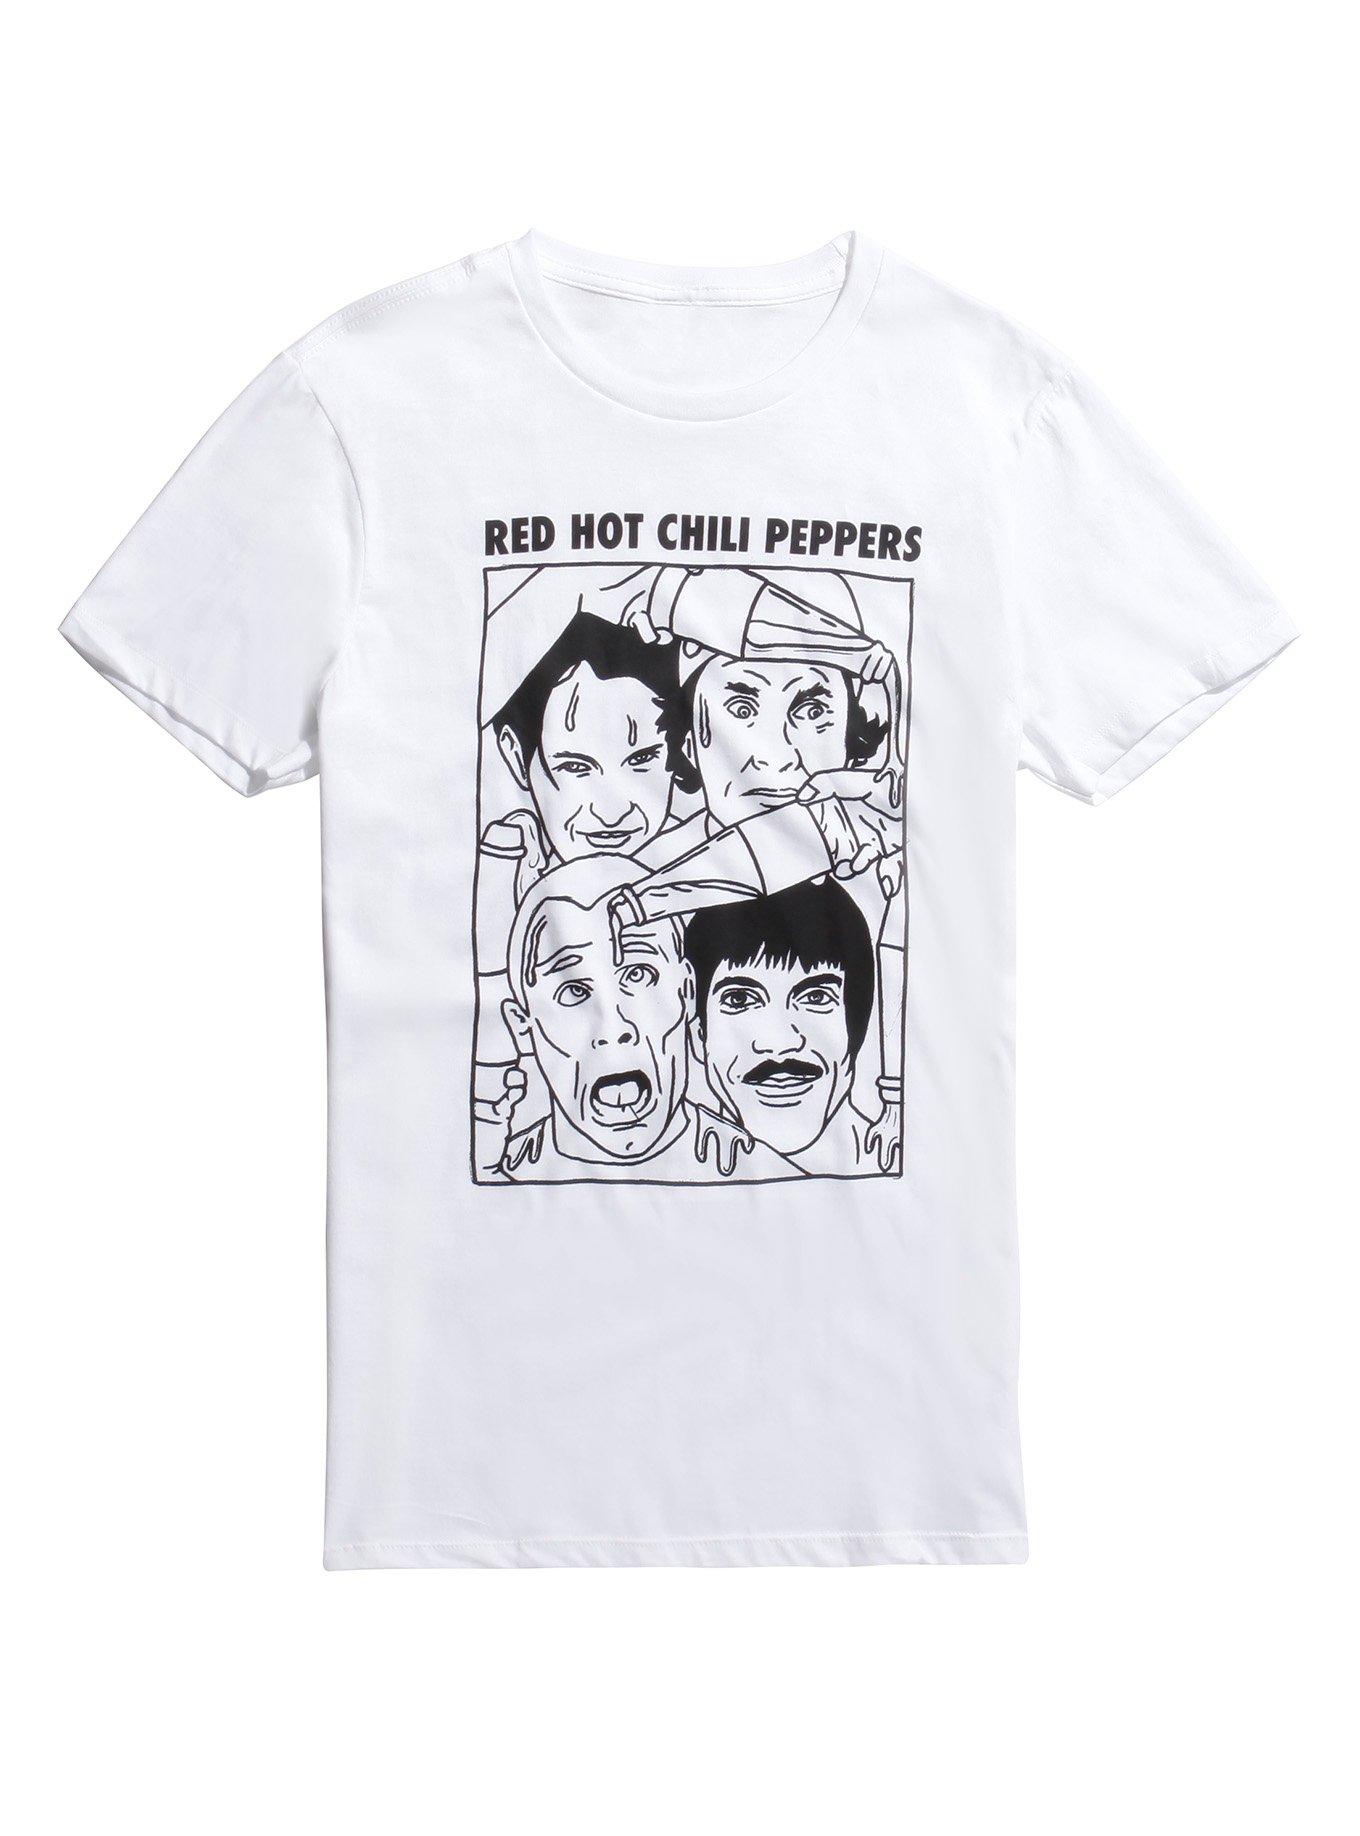 Red Hot Chili Peppers Line Drawing T-Shirt, WHITE, hi-res